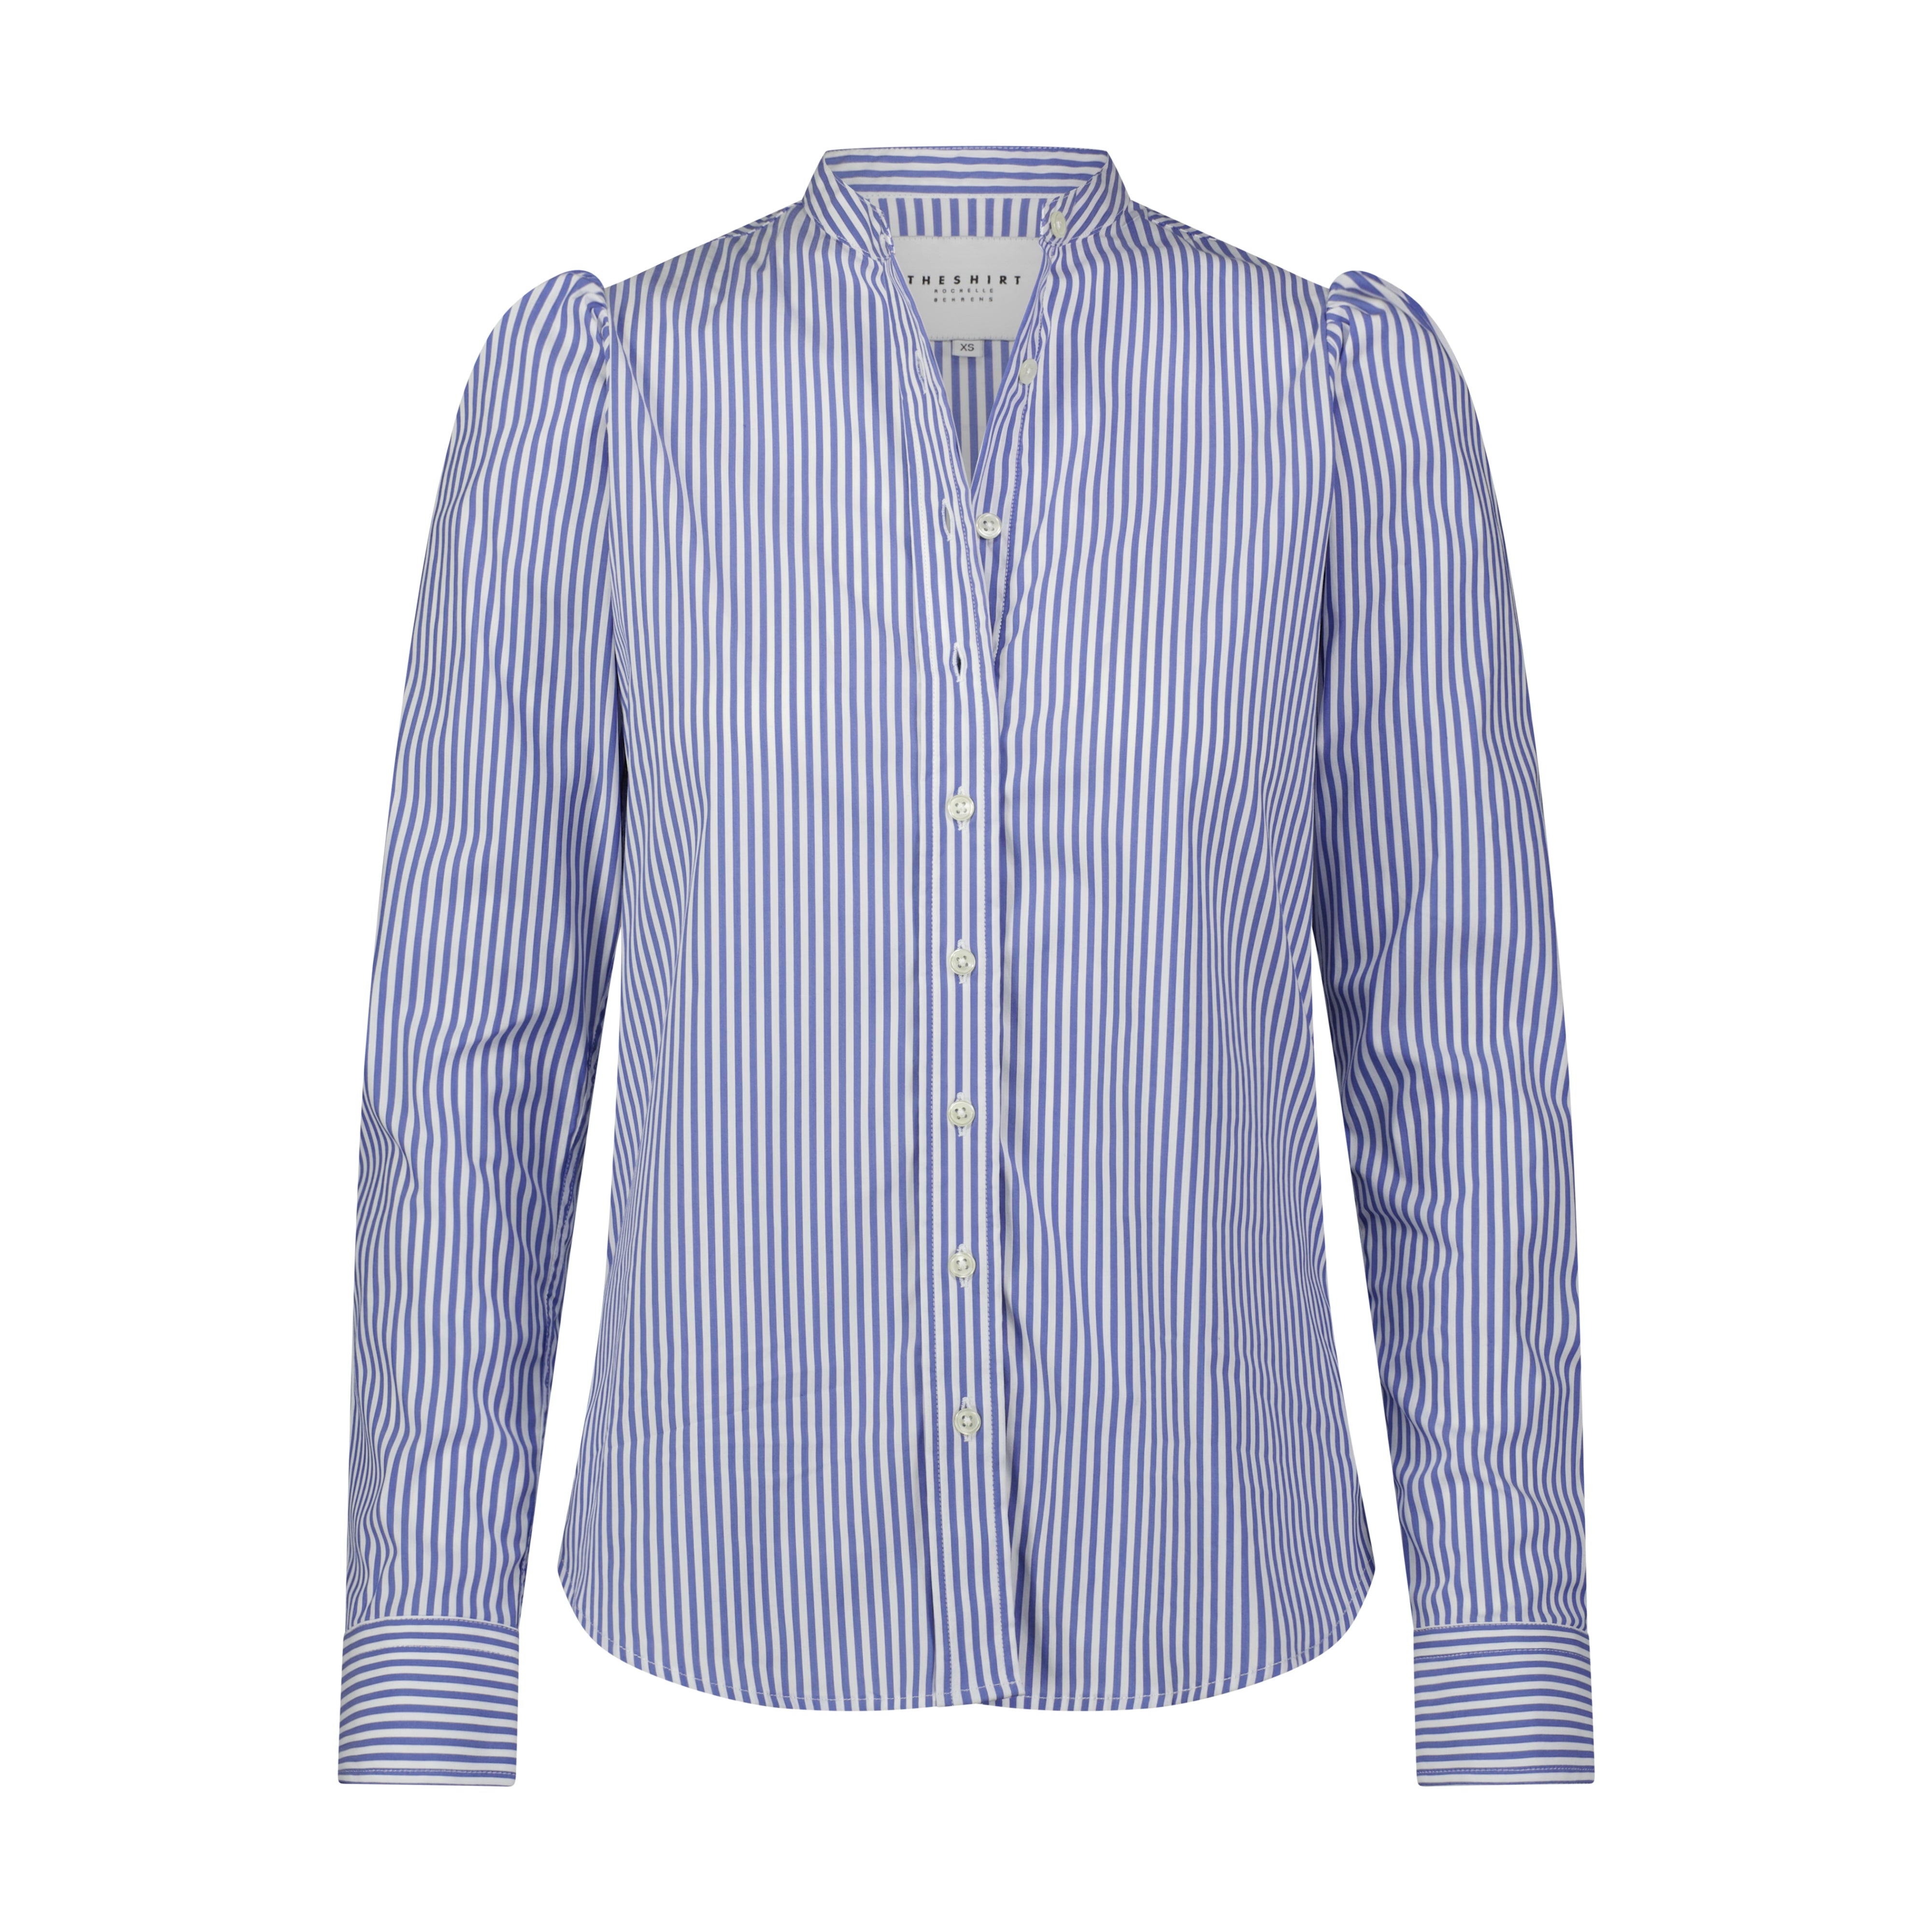 The Shirt by Rochelle Behrens - The Puffed Shoulder Shirt - Blue/White ...